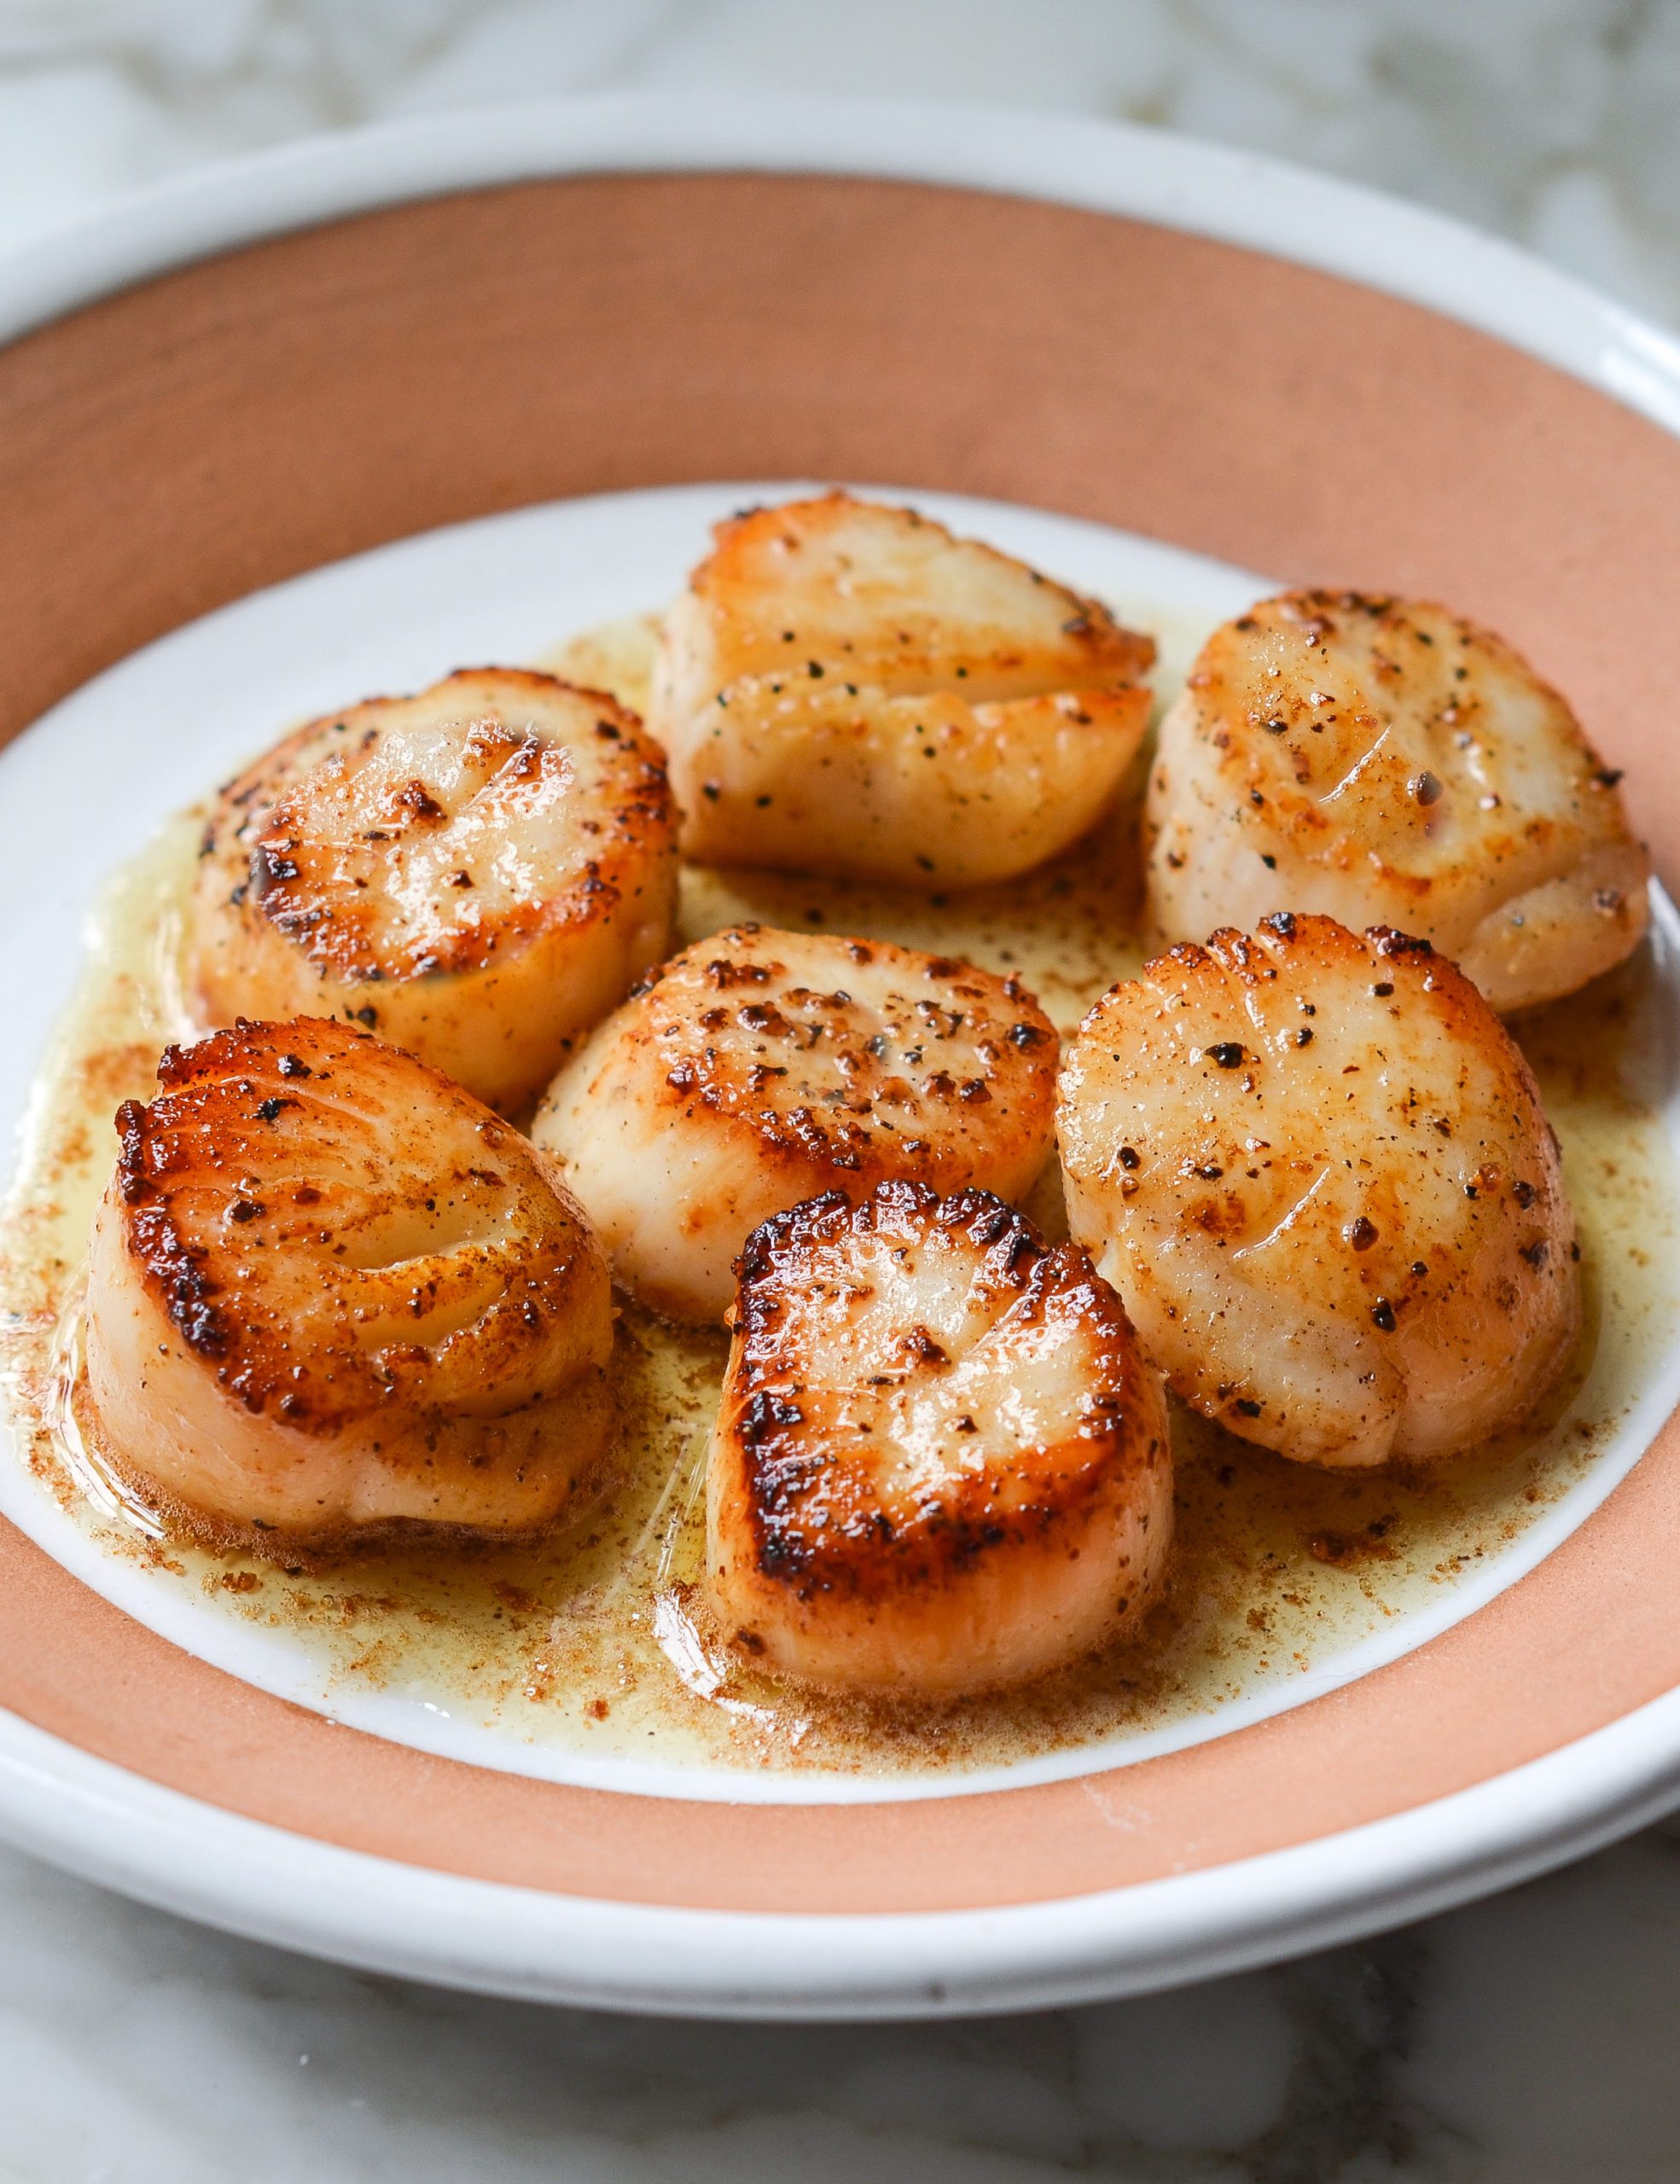 https://www.onceuponachef.com/images/2022/03/how-to-cook-scallops-2-scaled.jpg